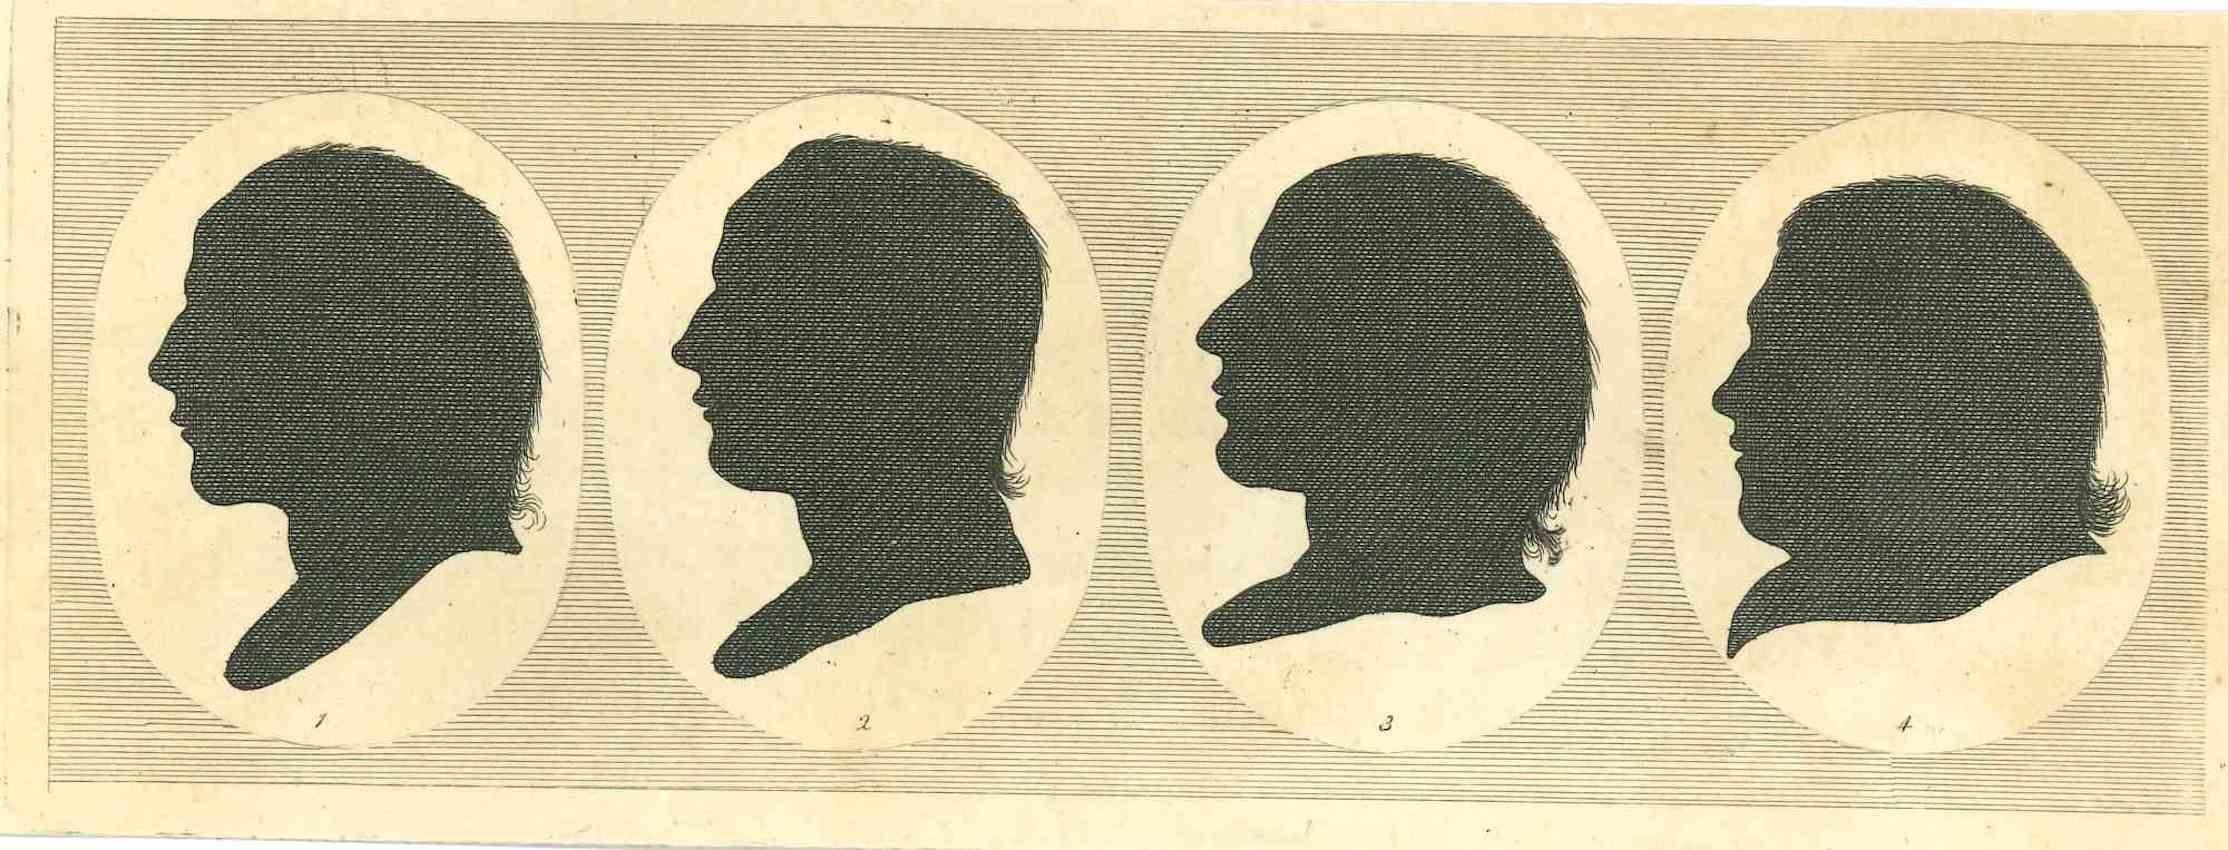 The Silhouette Profiles - The Physiognomy is an original etching artwork realized by Thomas Holloway for Johann Caspar Lavater's "Essays on Physiognomy, Designed to Promote the Knowledge and the Love of Mankind", London, Bensley, 1810. 

Good